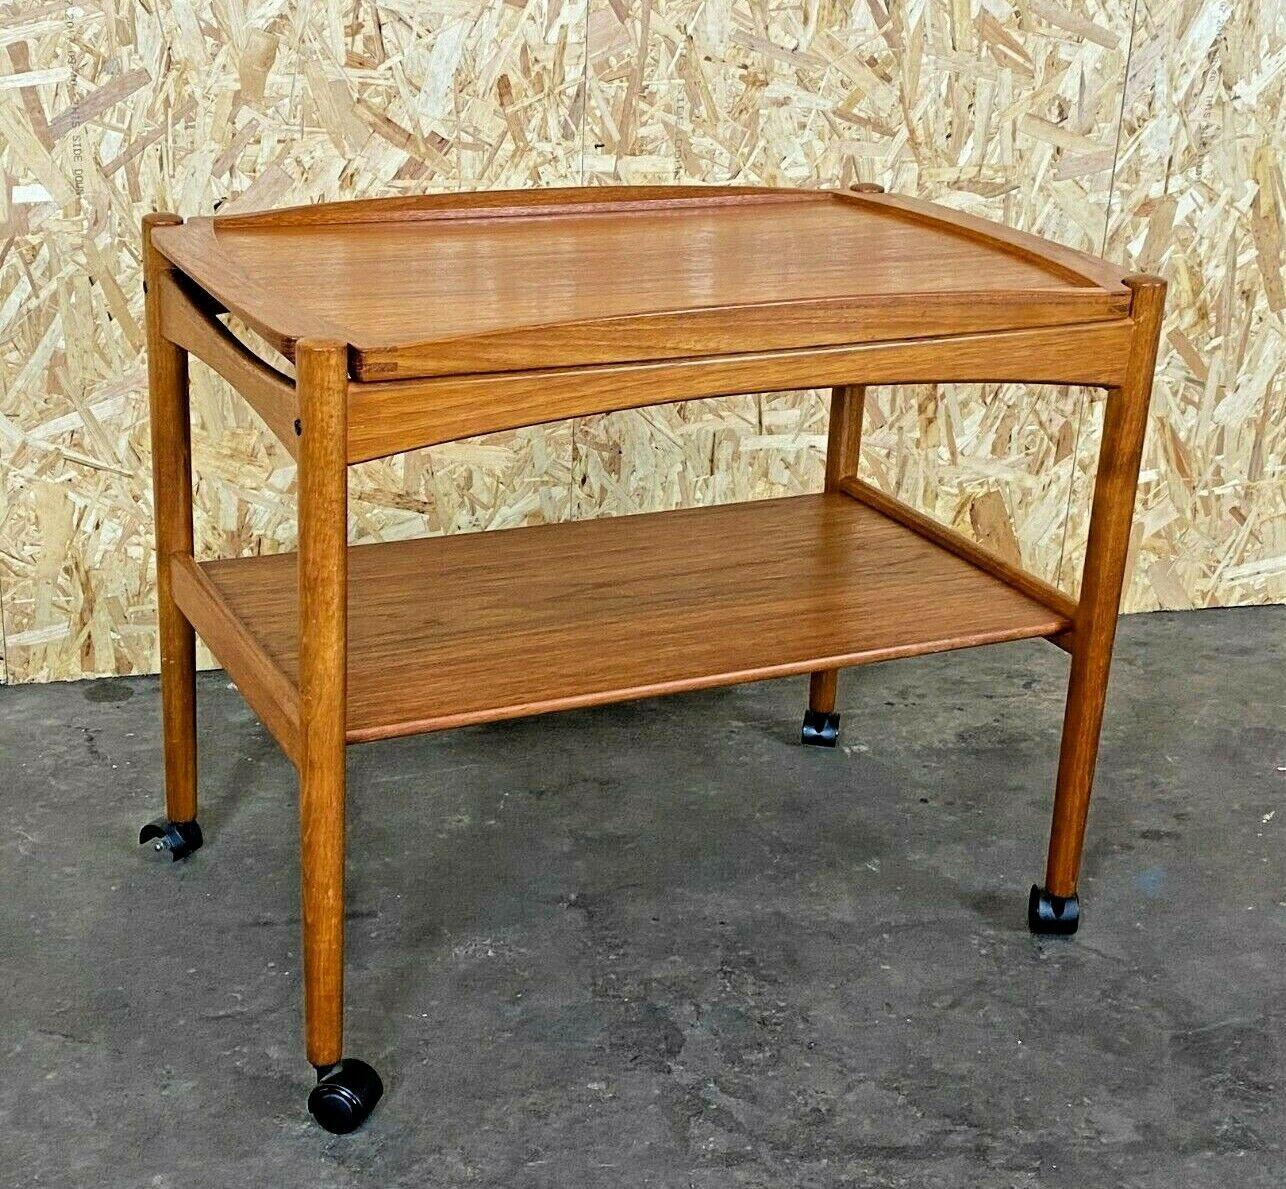 60s 70s teak serving trolley side table Danish Design Denmark

Object: Serving trolley

Manufacturer:

Condition: good

Age: around 1960-1970

Dimensions:

73cm x 43cm x 60cm

Other notes:

The pictures serve as part of the